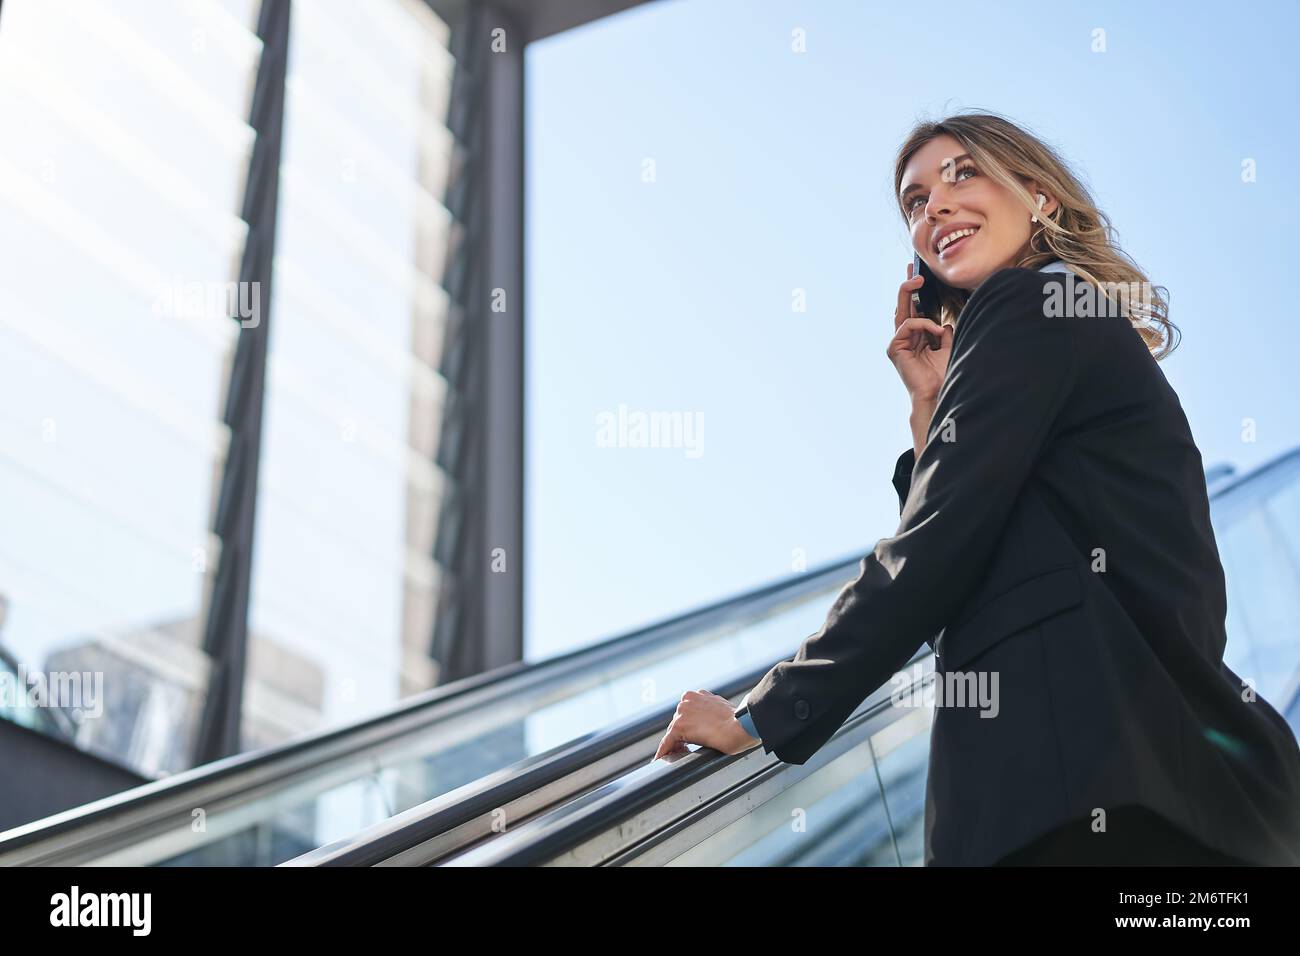 Portrait of businesswoman in black suit, going up on escalator, talking on mobile phone. Saleswoman walking in city, having a ca Stock Photo